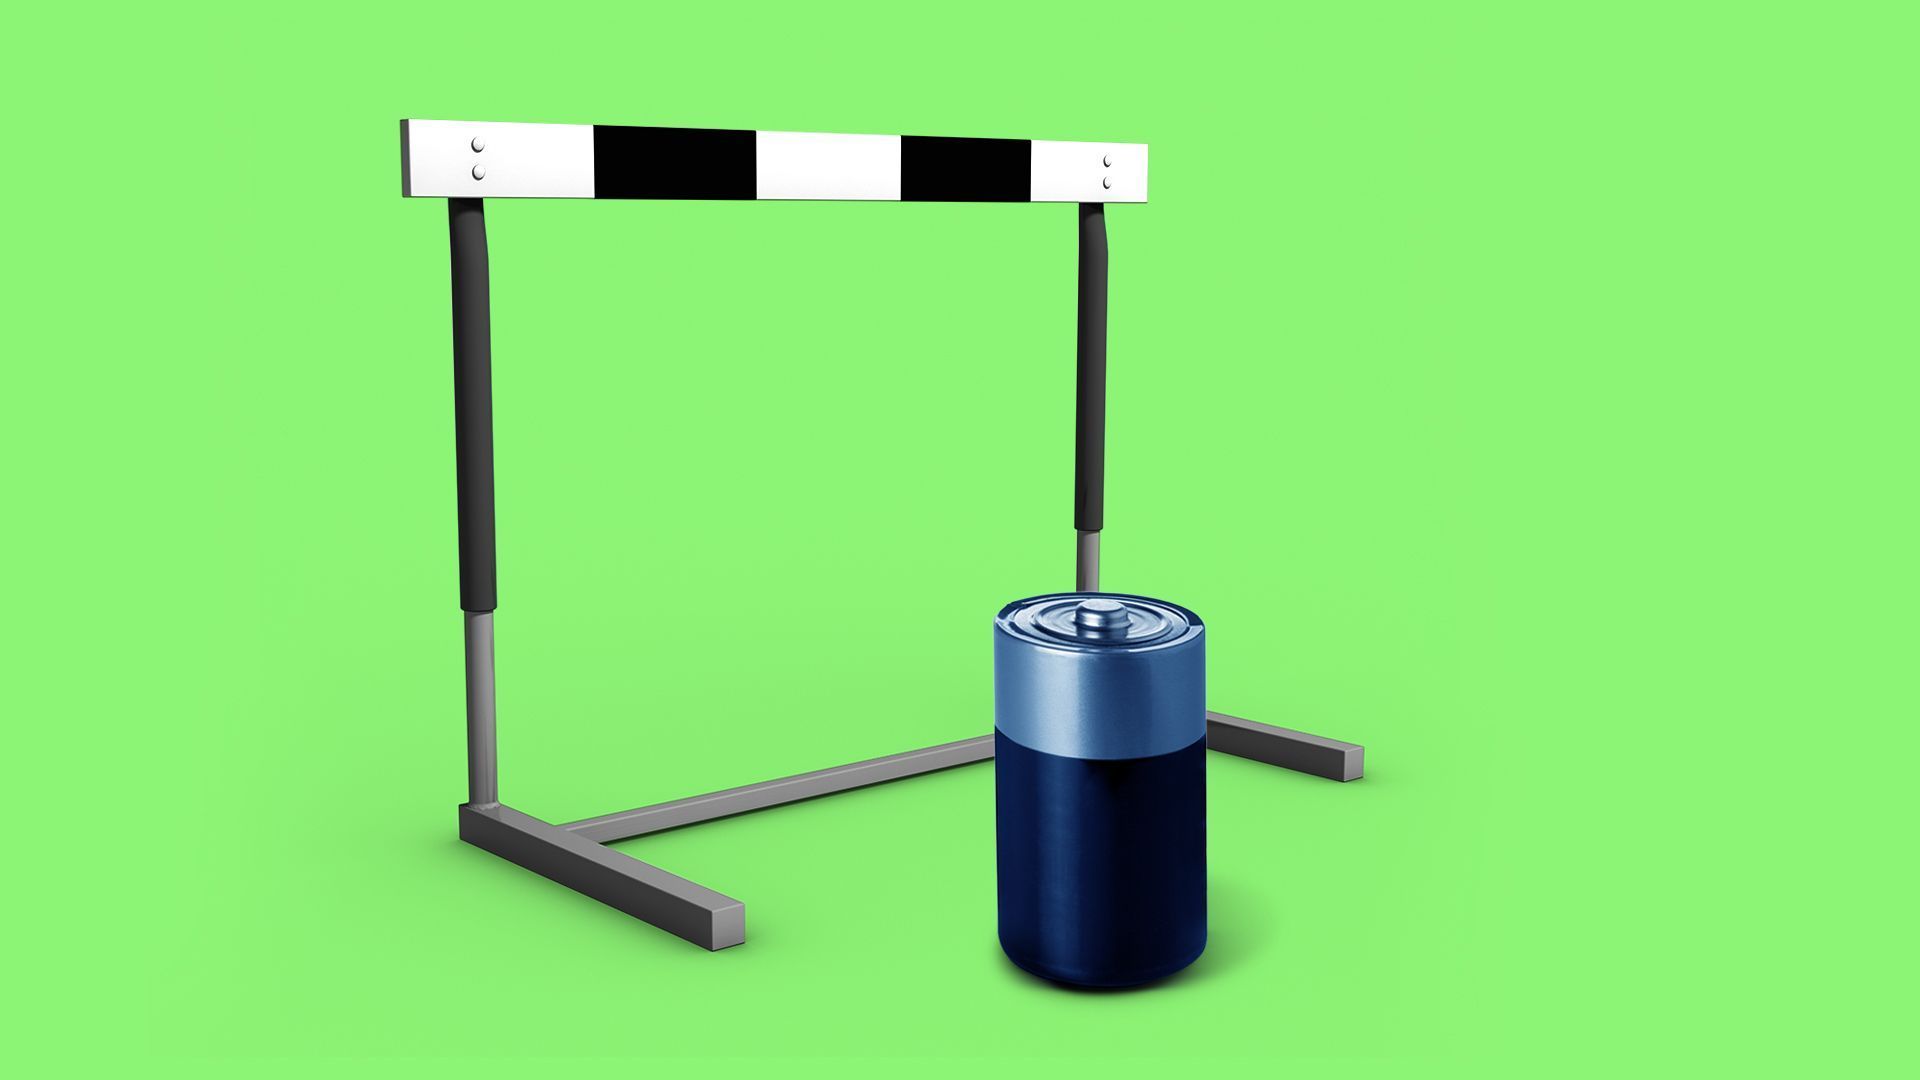 Illustration of battery in front of hurdle